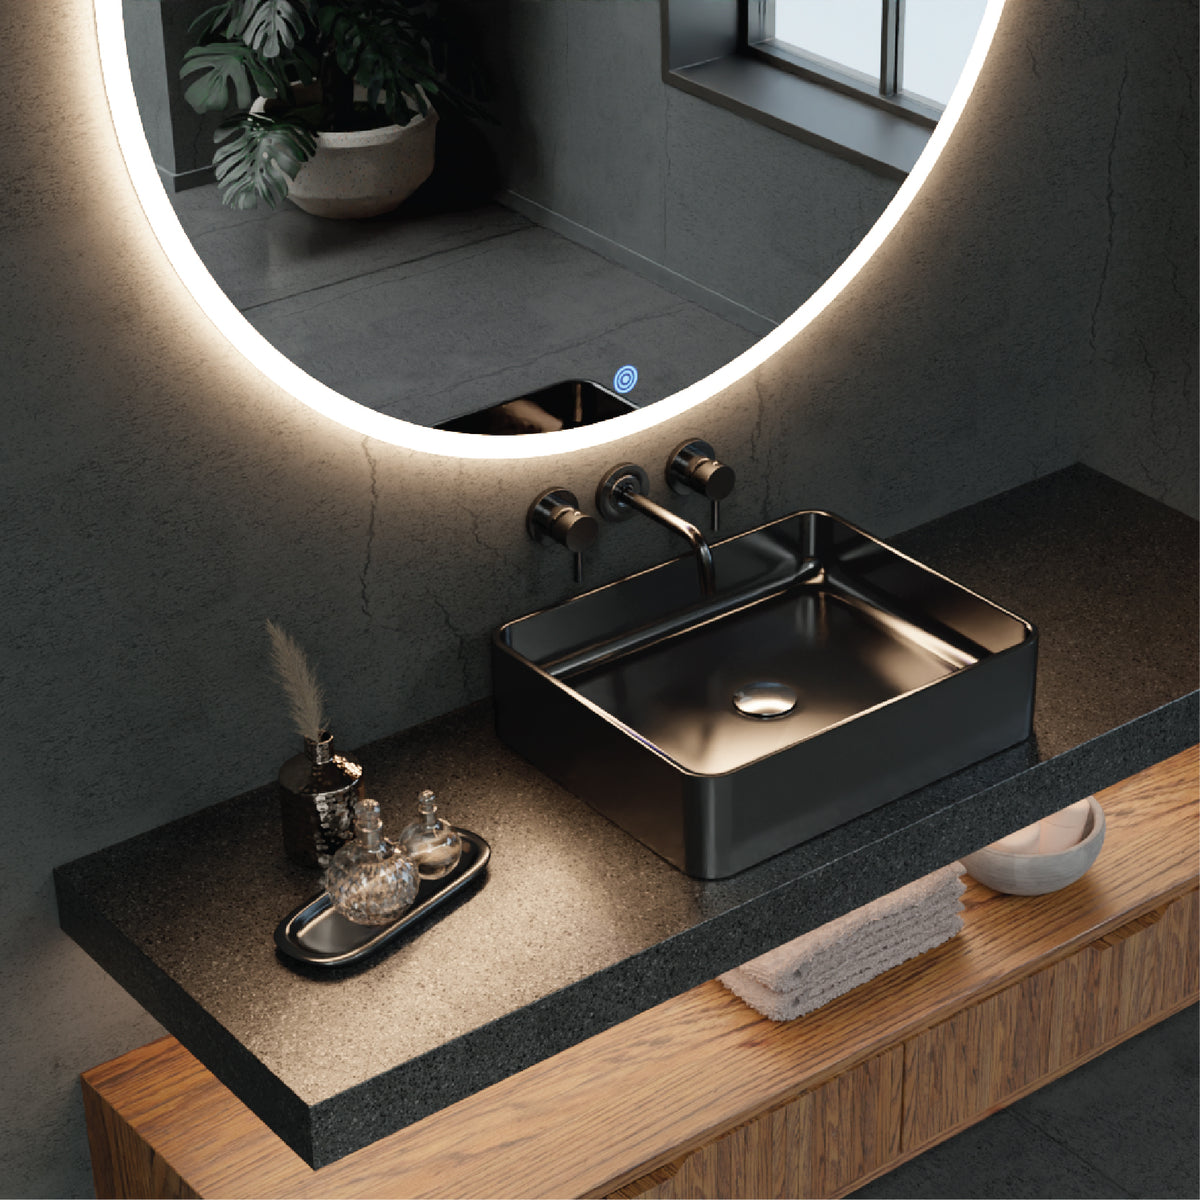 Titan's LED Mirror effortlessly combines form and function, becoming a focal point in your bathroom.